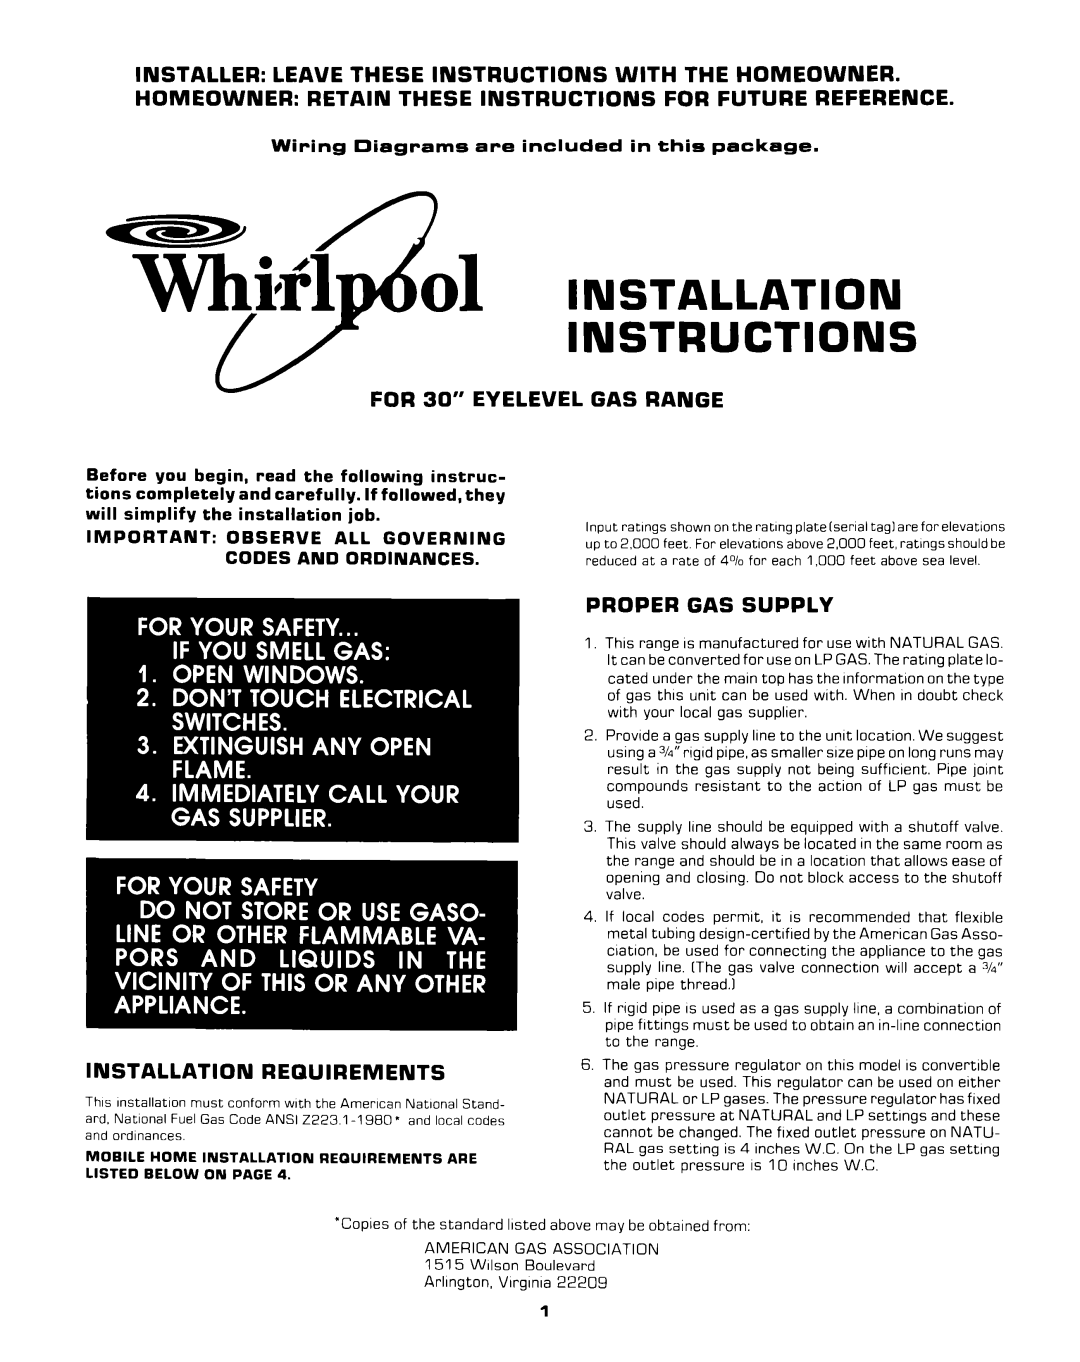 Whirlpool Range installation instructions FOR 30” EYELEVEL GAS RANGE, Proper Gas Supply, Installation Requirements 